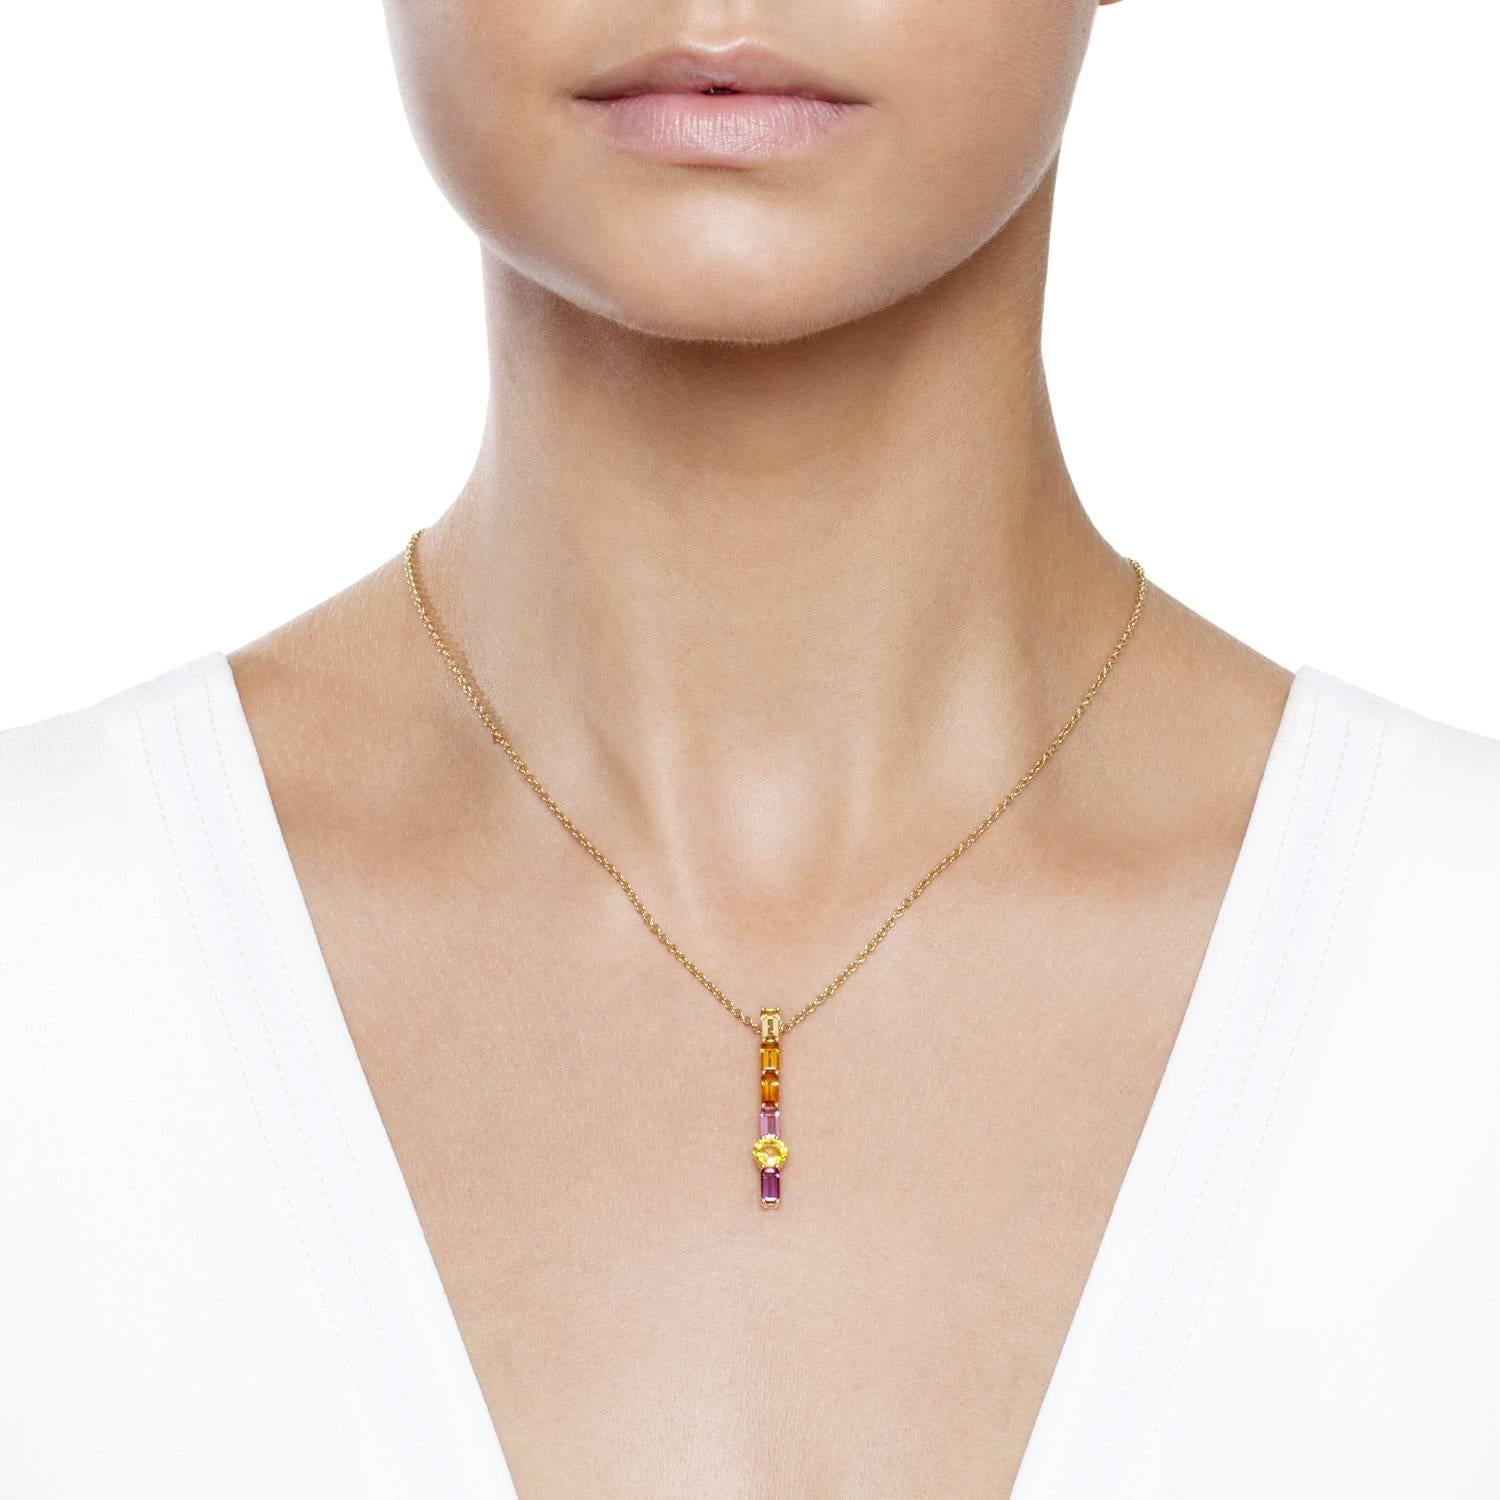 Eye-catching simplicity and vibrancy in a fusion of orange yellows, pink and purple hand selected gemstones set beautifully to let light in and diffract all the colours within. Set in yellow gold to highlight the golden warmth and flame like flashes